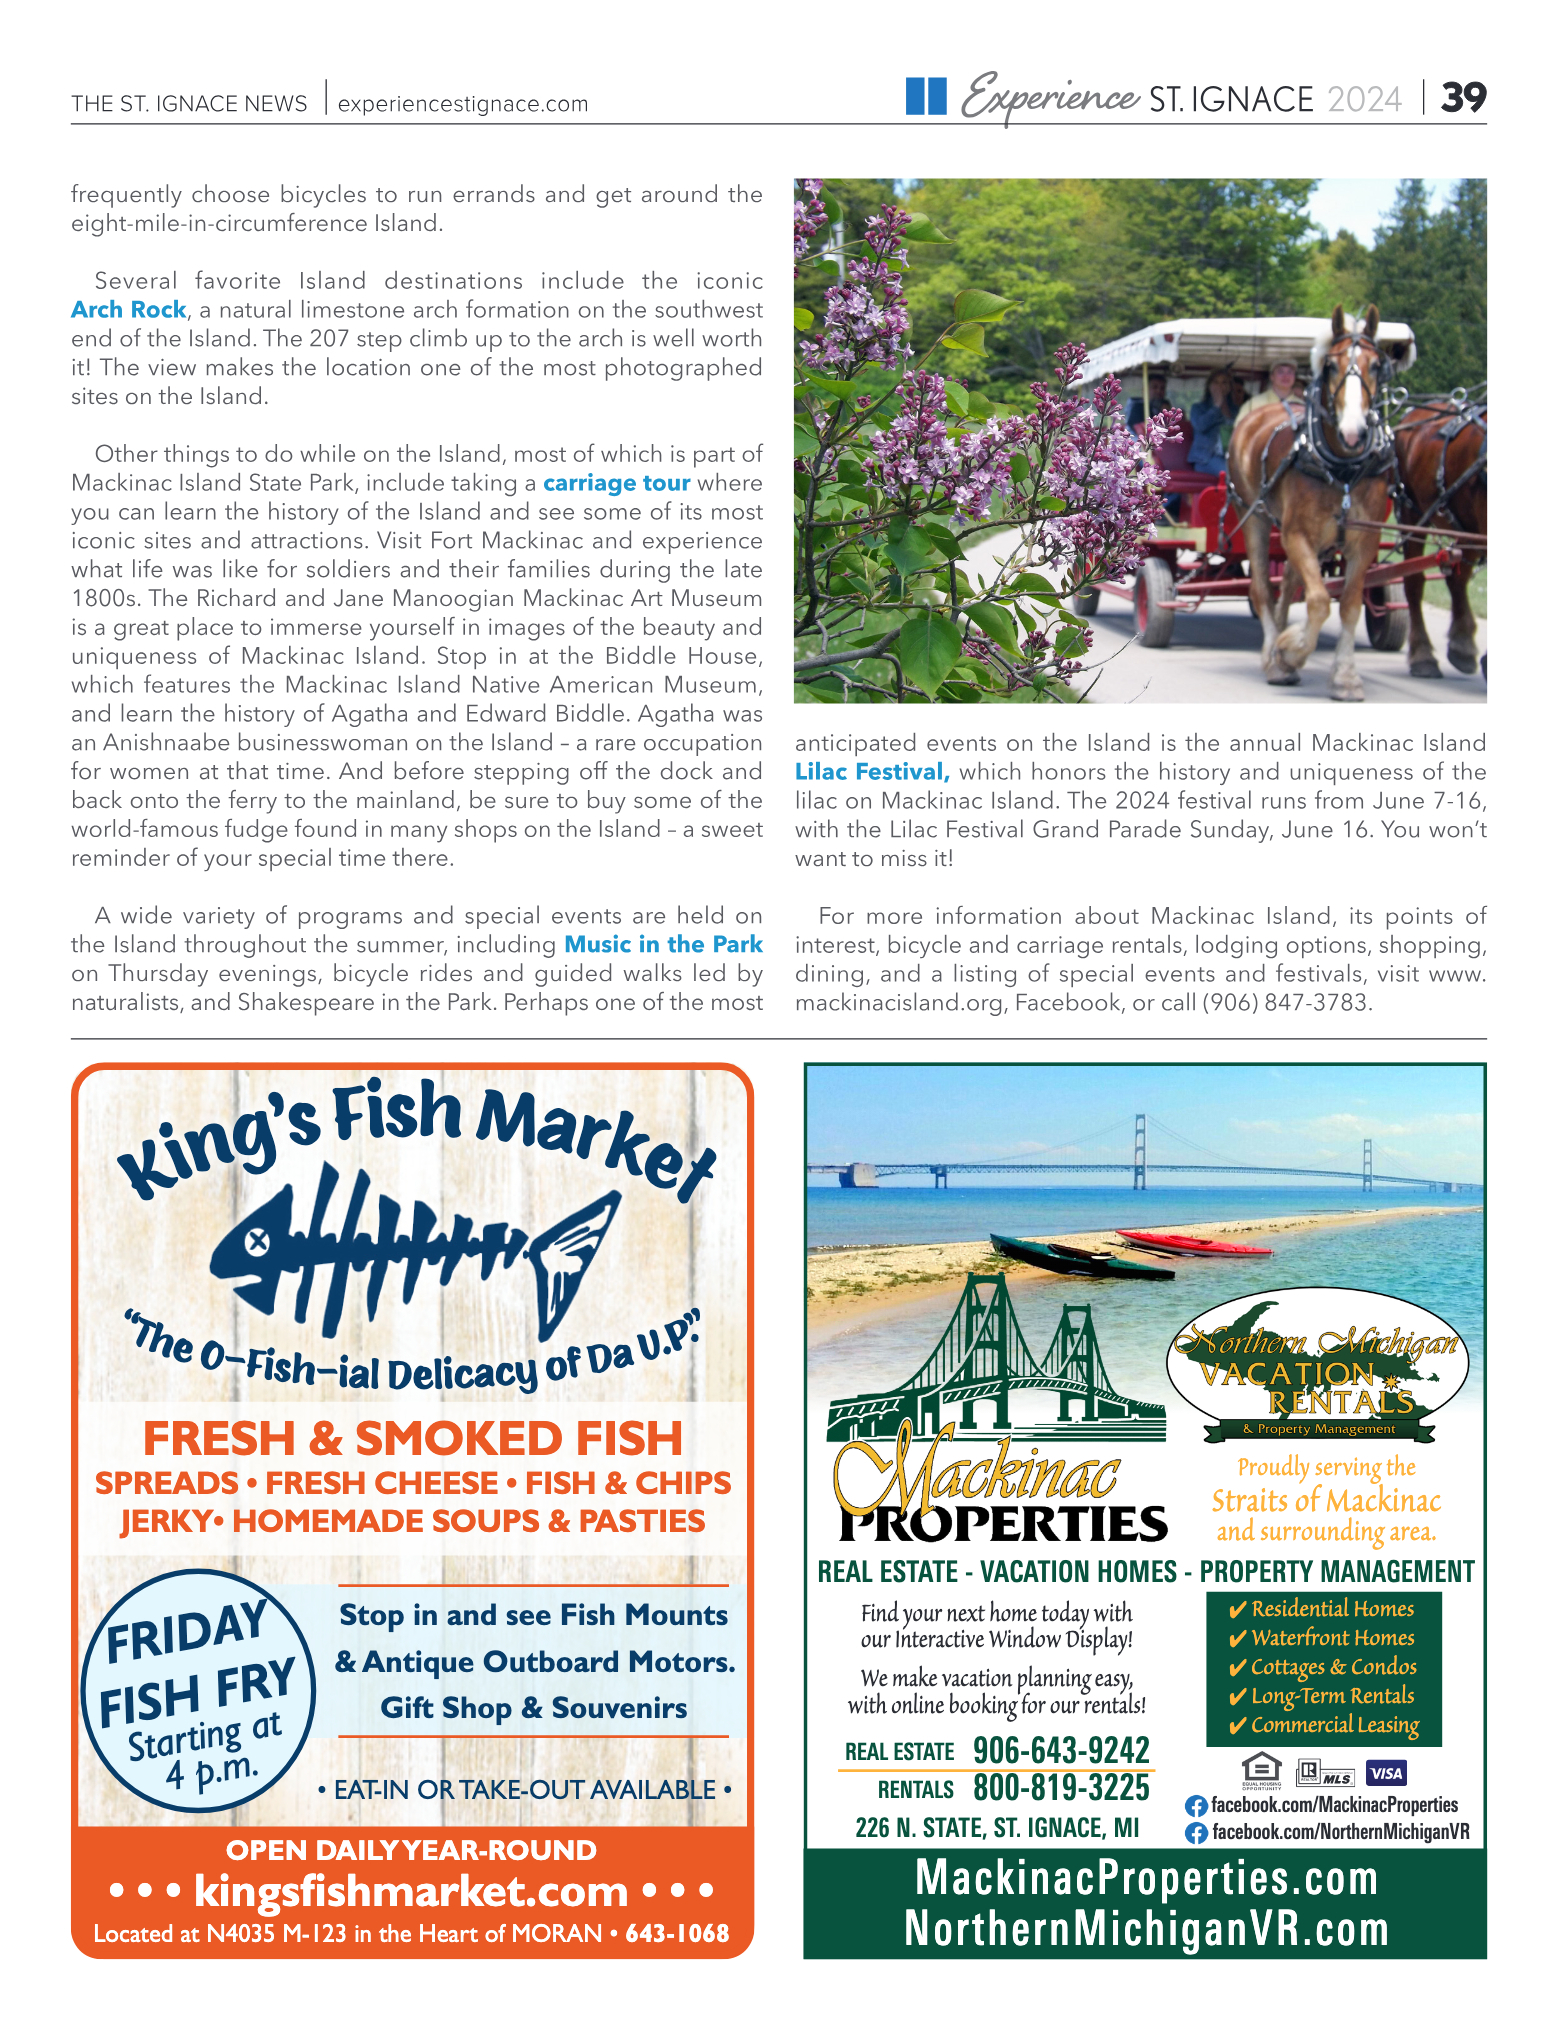 Experience St. Ignace - Guest Travel Guide 2024 - page 39